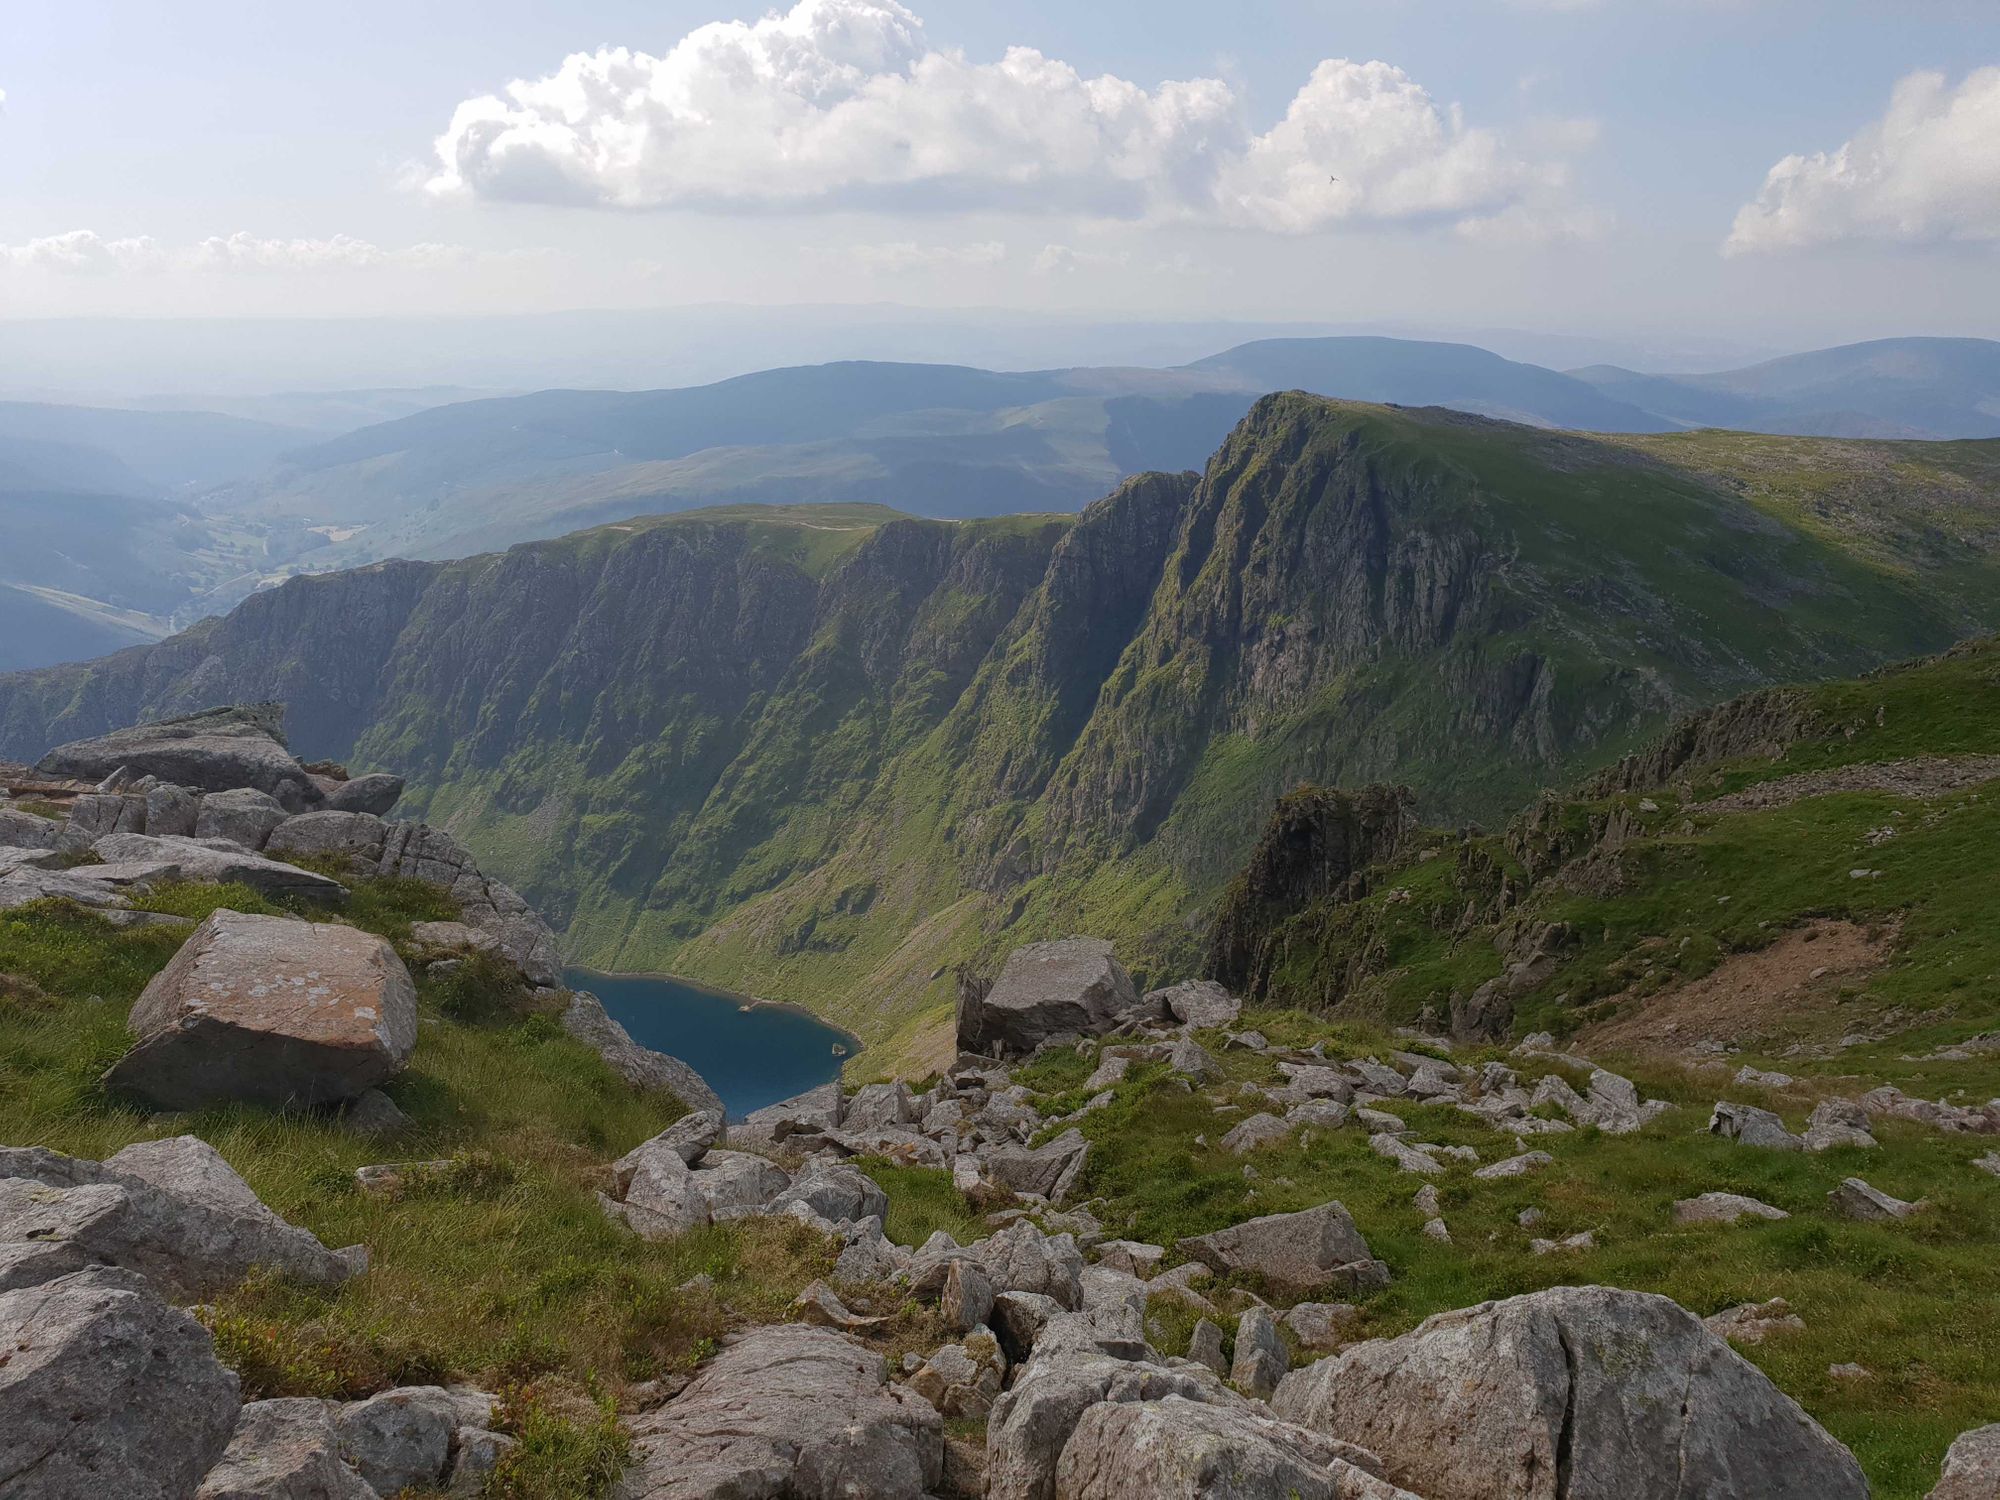 A view from the top of Snowdon, in Wales